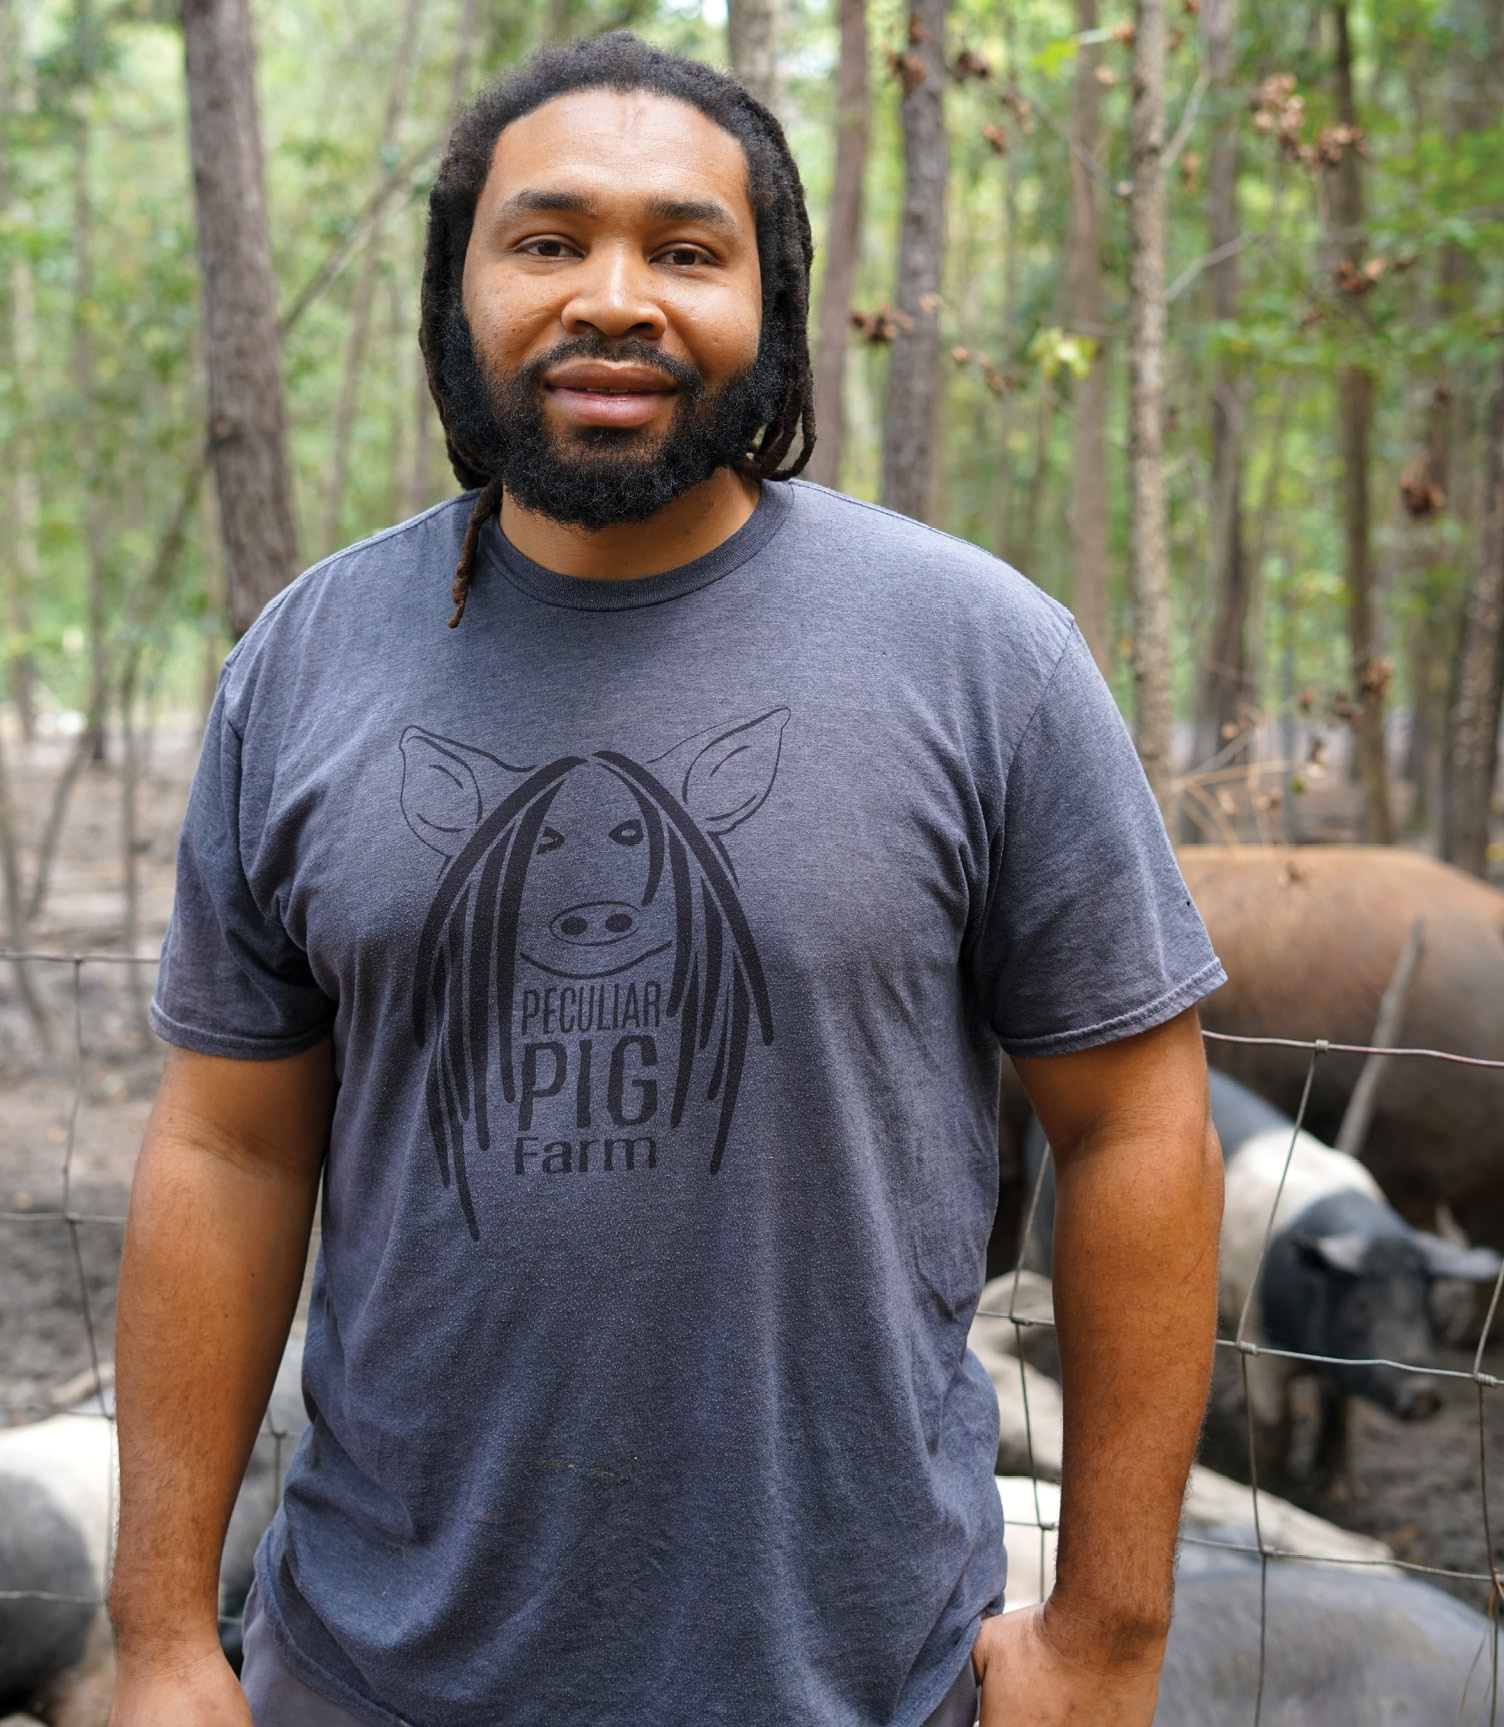 Ross has continued his family’s legacy through Peculiar Pig Farm, located in Dorchester County.